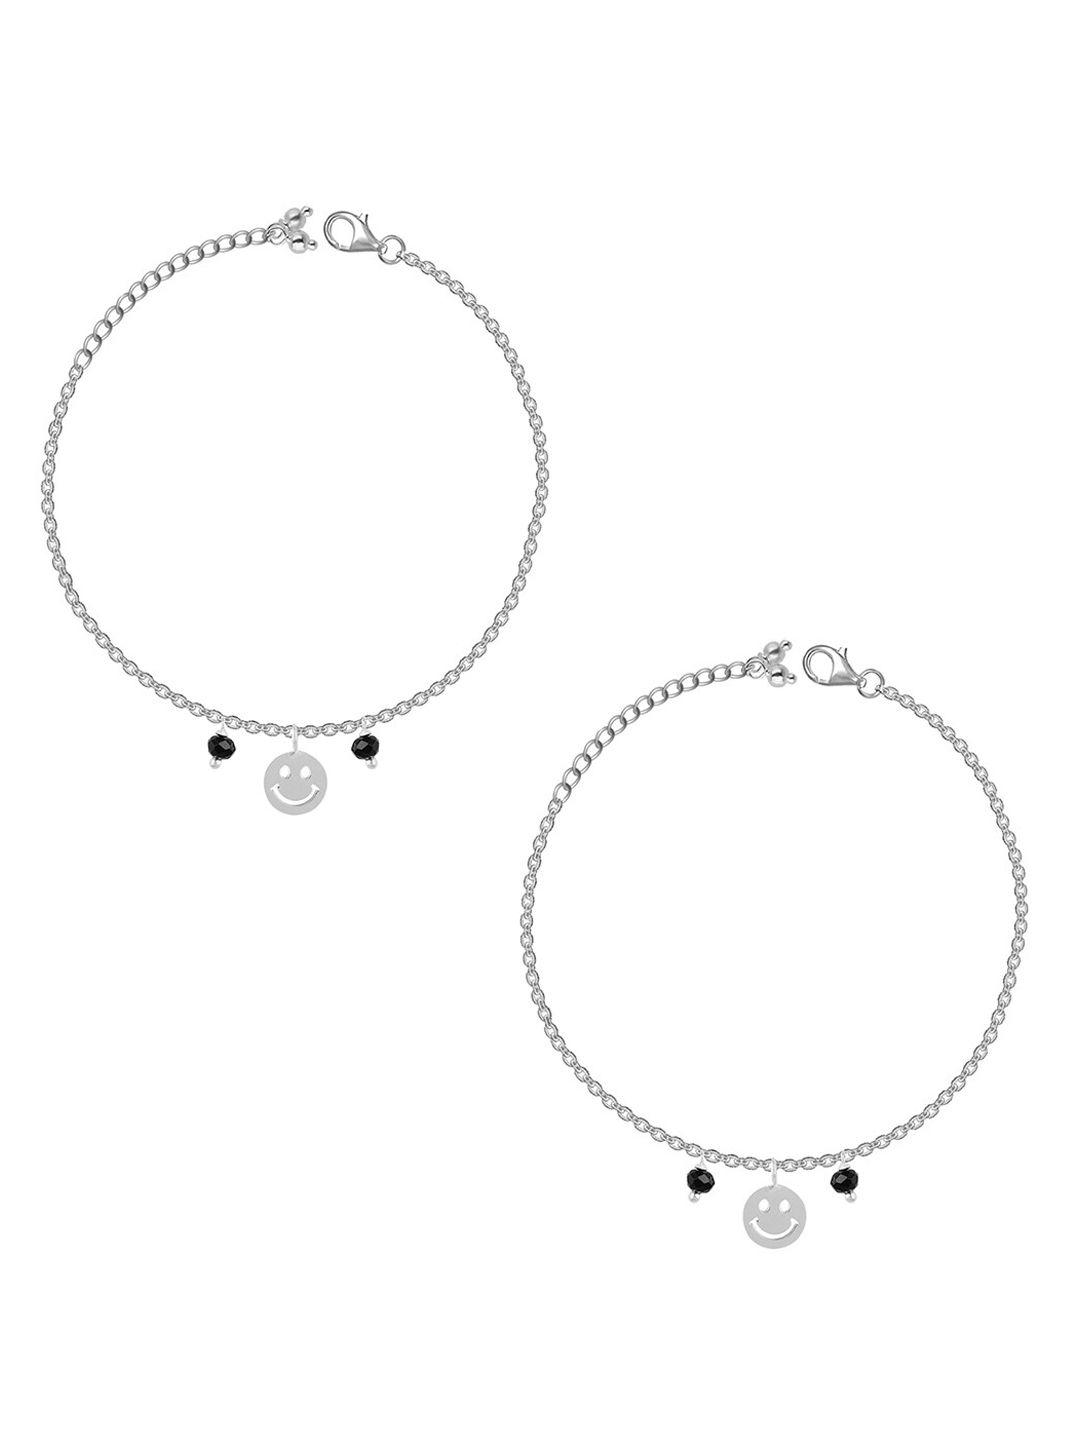 giva girls set of 2 925 sterling silver rhodium-plated beaded smiling face anklets